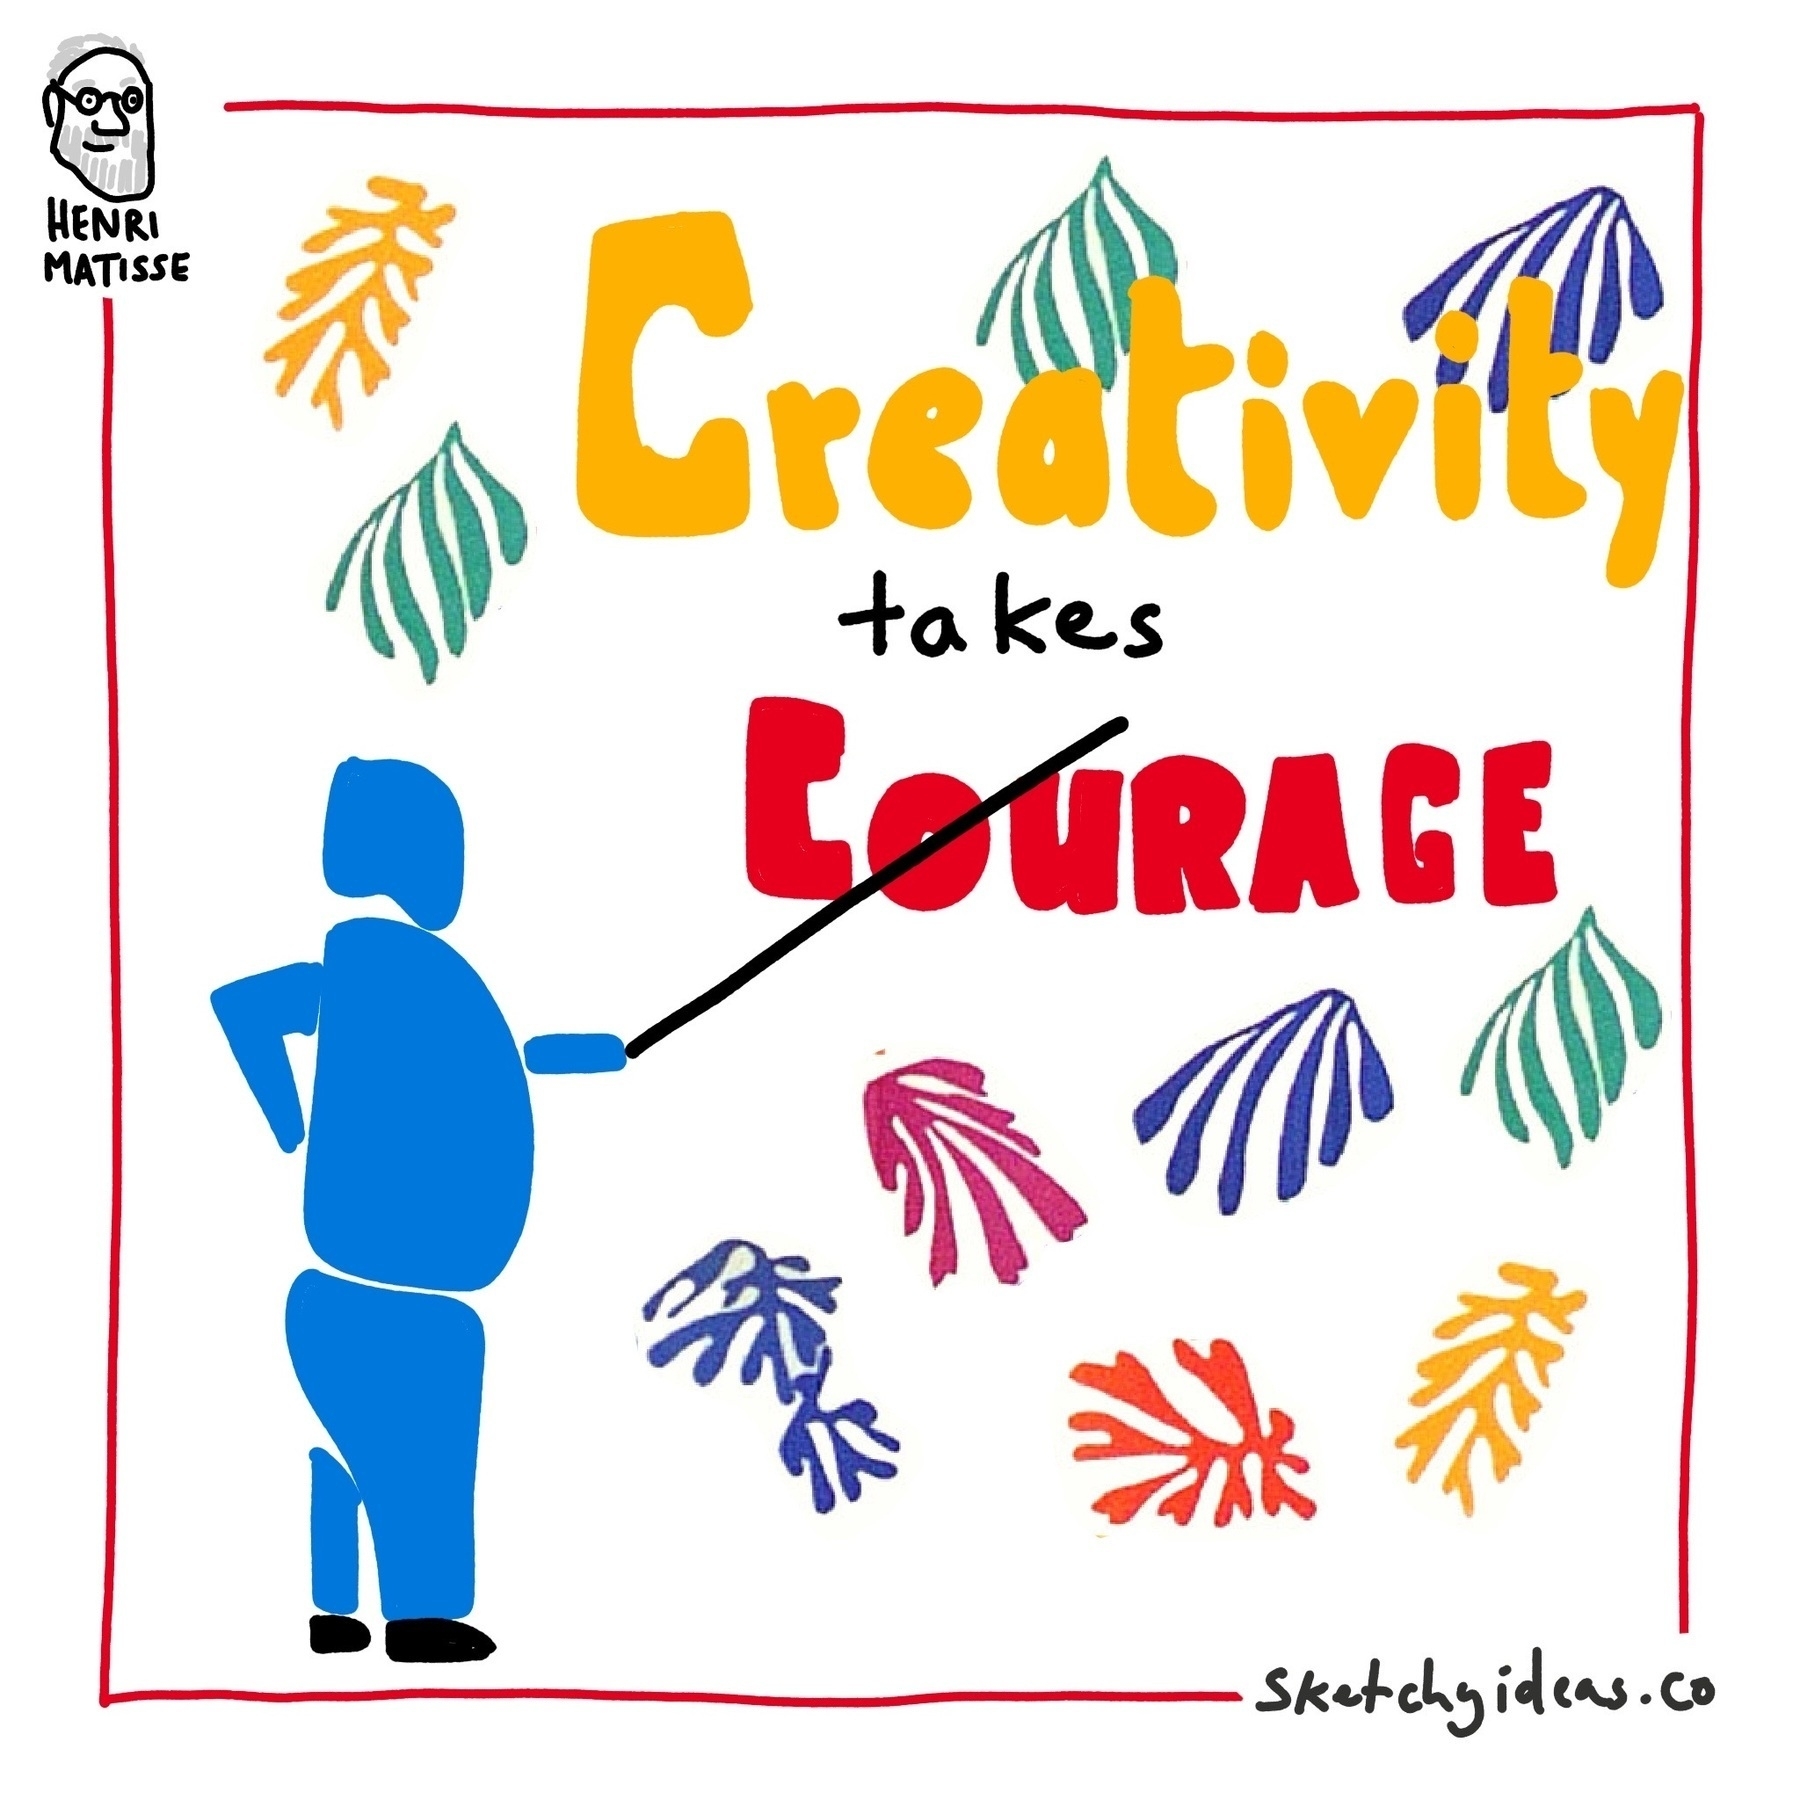 A graphic showing the Matisse quote “Creativity takes Courage” with a cutout of Matisse in blue. 